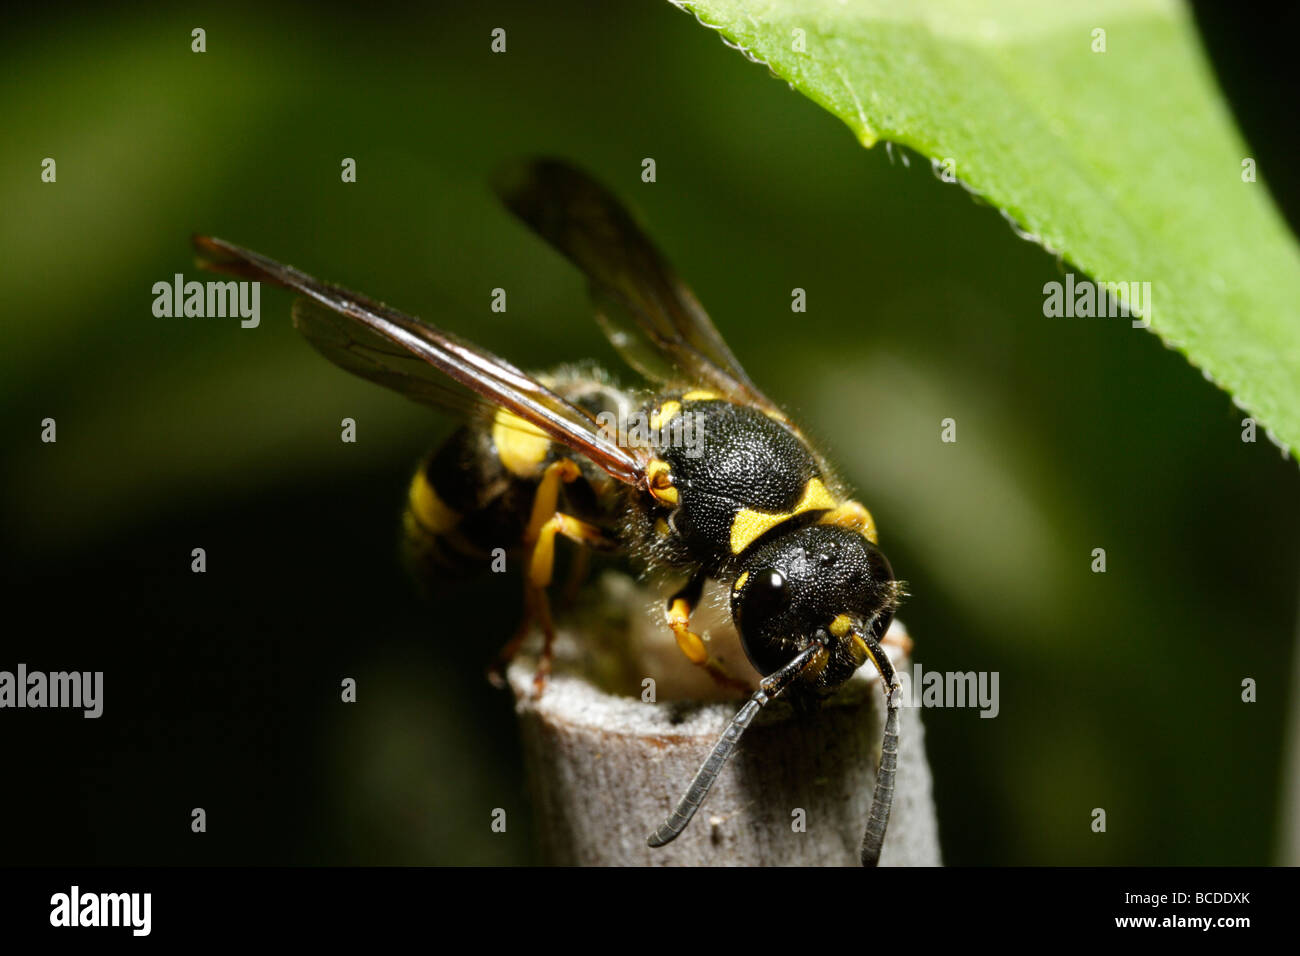 Ancistrocerus nigricornis, a solitary wasp nesting in various cavities like bamboo. The larvae feed on caterpillars. Stock Photo